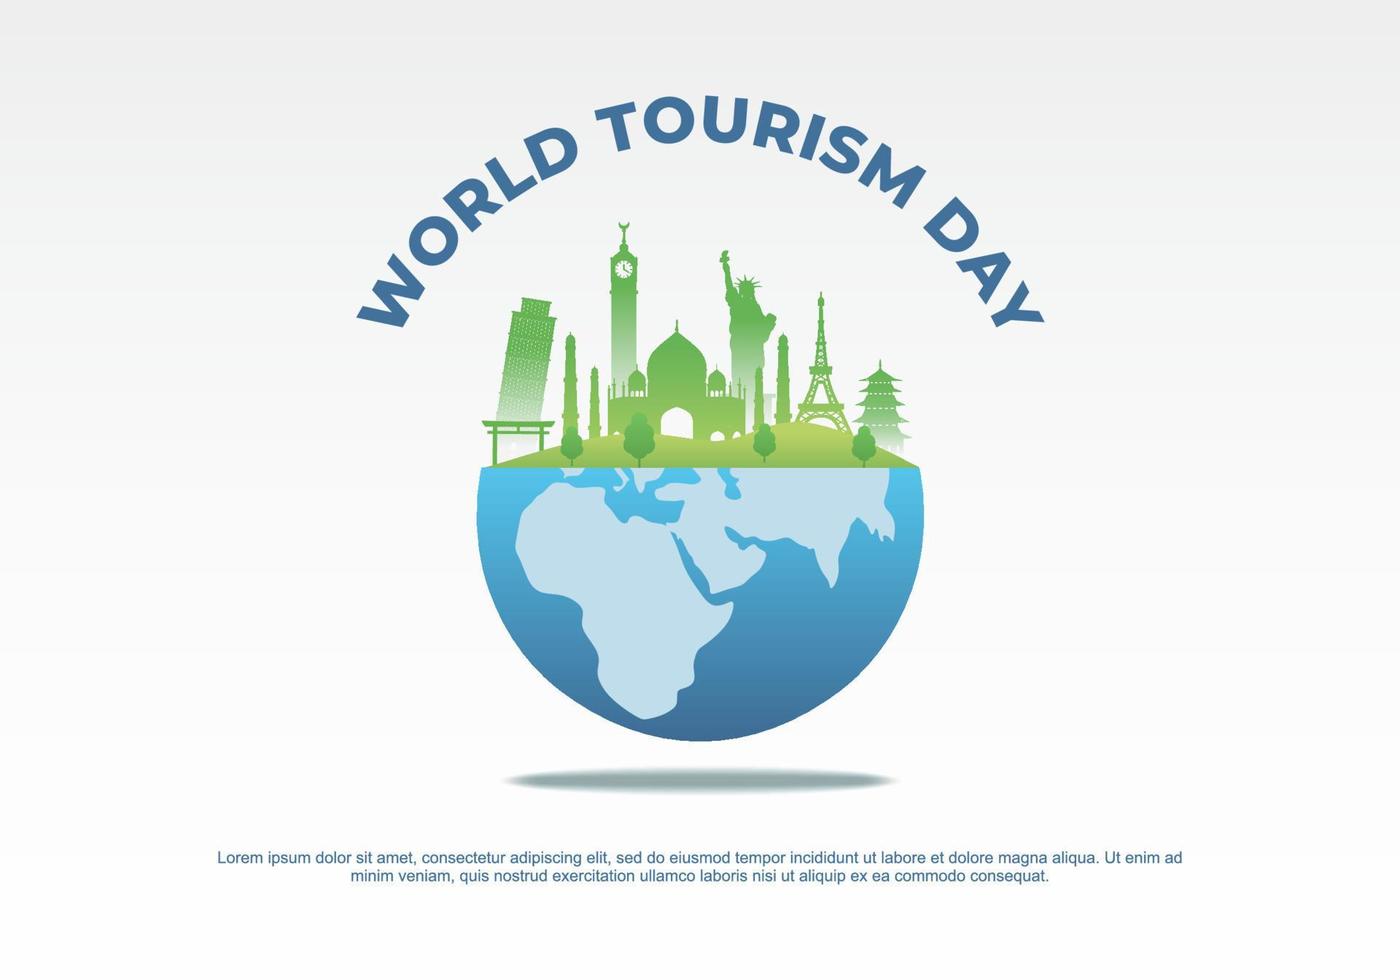 World tourism day background banner poster with globe earth and tourist building on september 27. vector